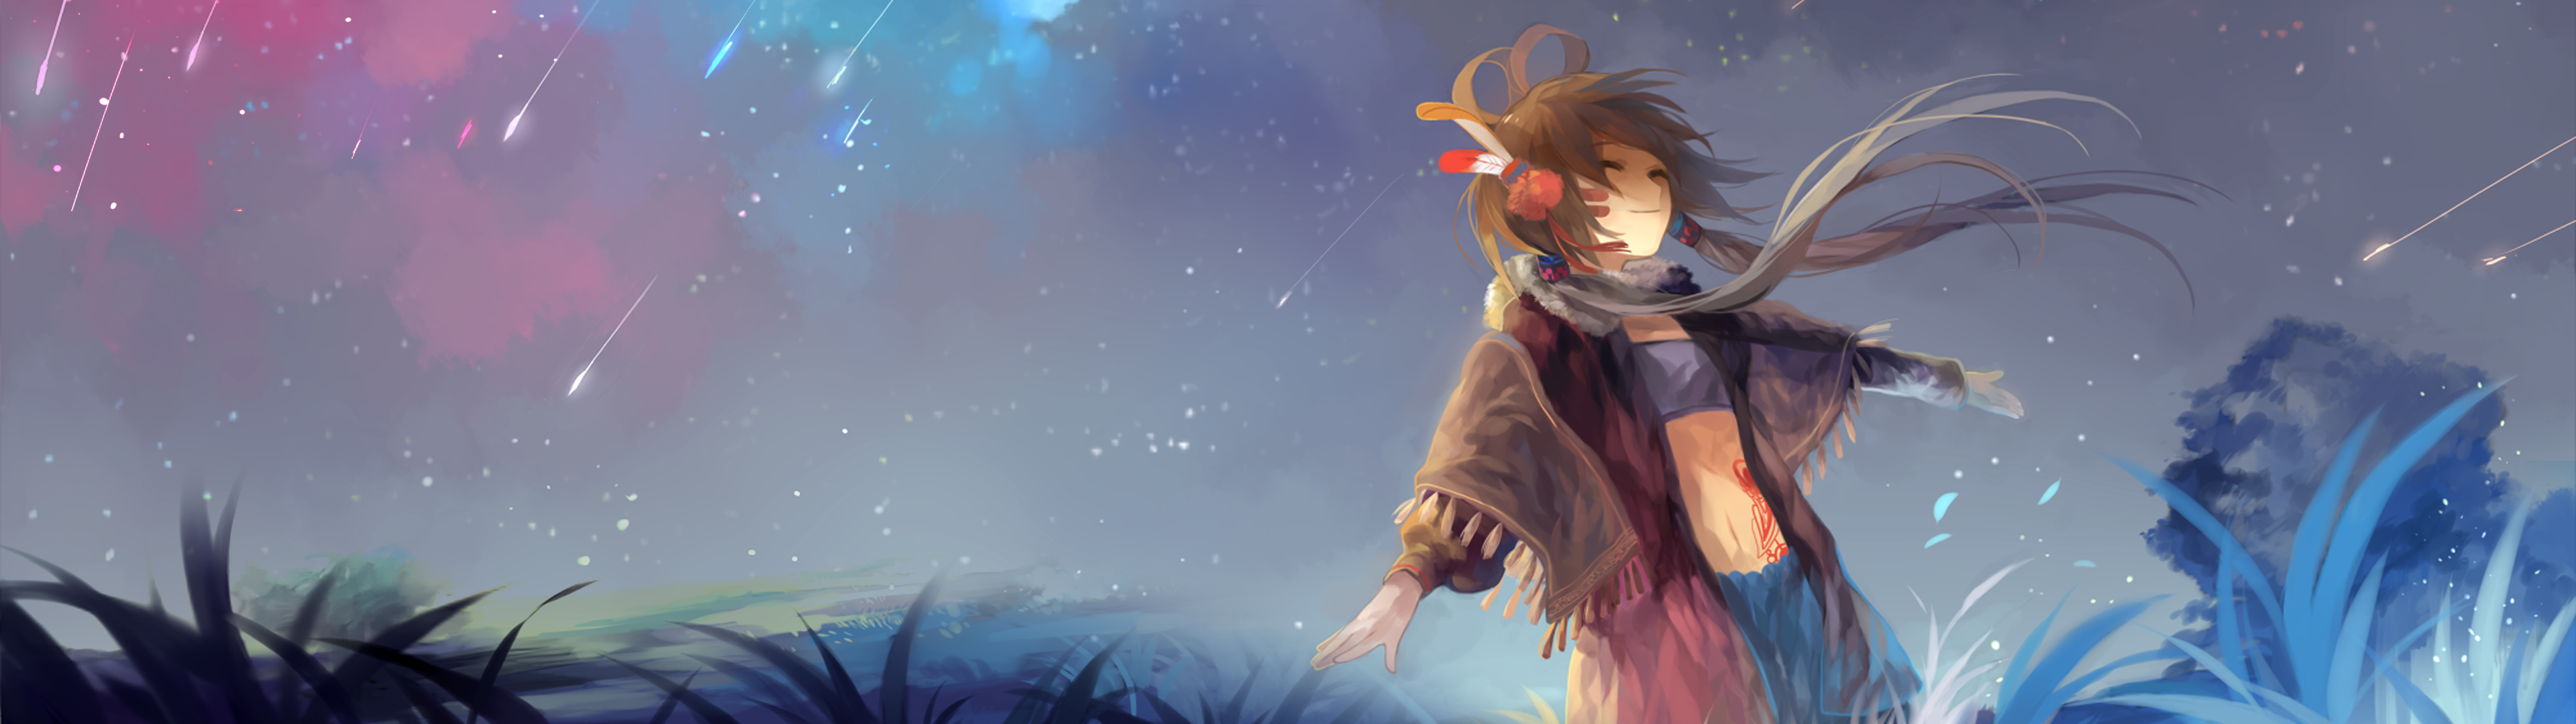 Anime Long Hair Anime Girls Shooting Stars Grass Stars Sky Nature Dancing Happy Face Luo Tianyi Voca 3840x1080